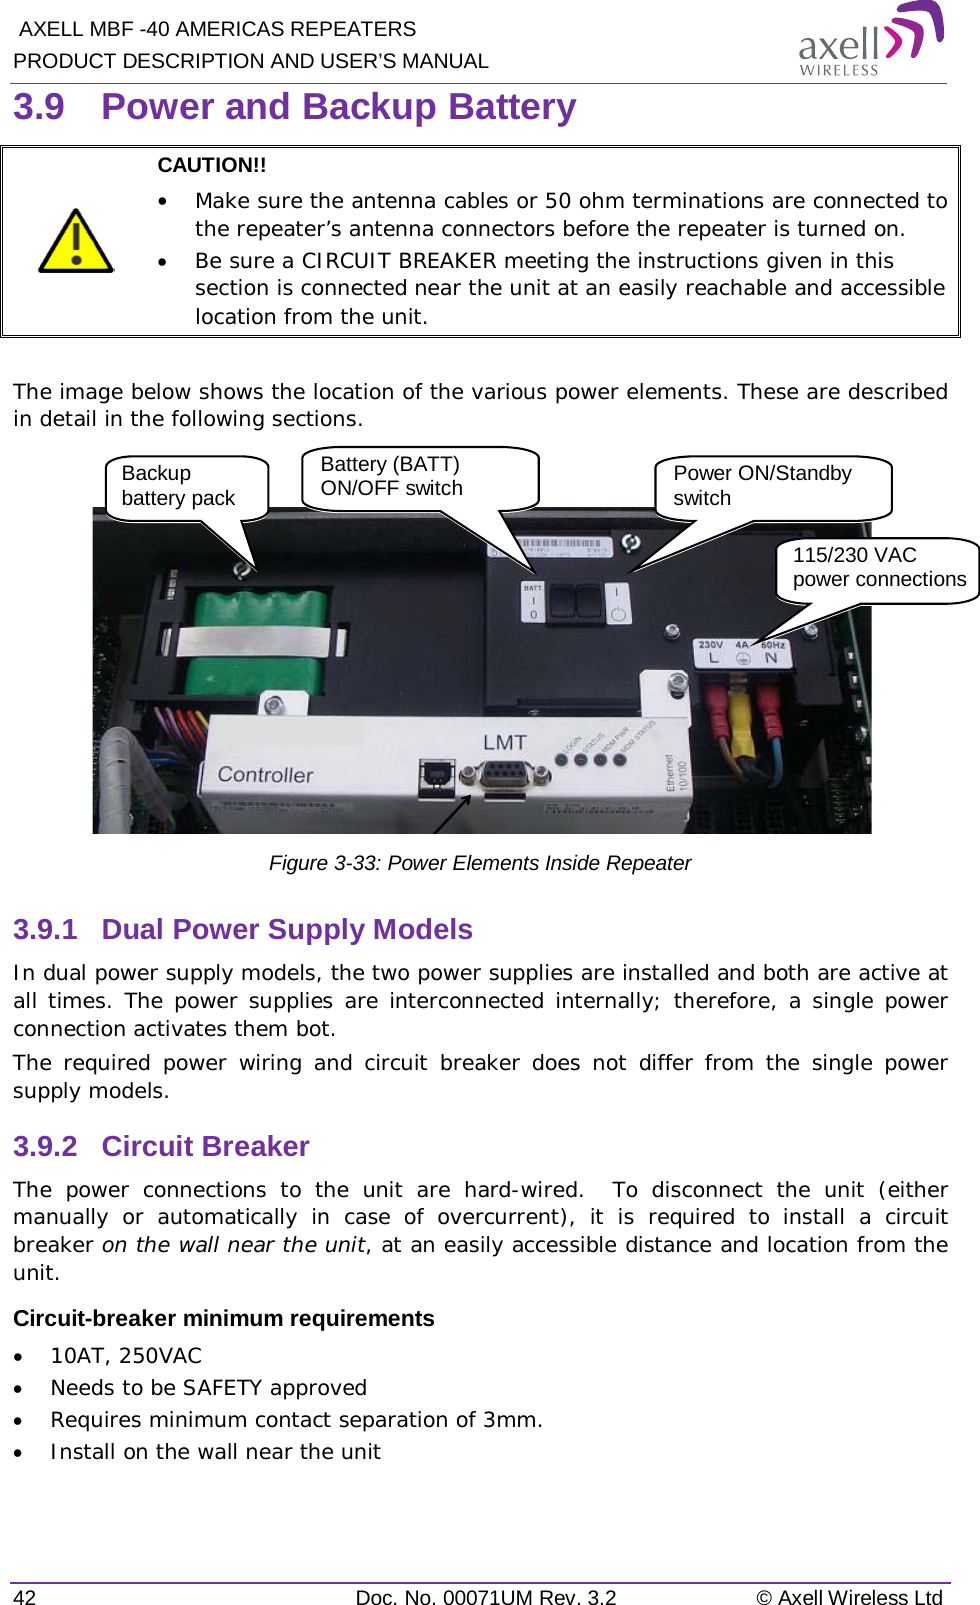  AXELL MBF -40 AMERICAS REPEATERS PRODUCT DESCRIPTION AND USER’S MANUAL 42 Doc. No. 00071UM Rev. 3.2 © Axell Wireless Ltd 3.9  Power and Backup Battery  CAUTION!!  • Make sure the antenna cables or 50 ohm terminations are connected to the repeater’s antenna connectors before the repeater is turned on.  • Be sure a CIRCUIT BREAKER meeting the instructions given in this section is connected near the unit at an easily reachable and accessible location from the unit.  The image below shows the location of the various power elements. These are described in detail in the following sections.   Figure  3-33: Power Elements Inside Repeater 3.9.1  Dual Power Supply Models In dual power supply models, the two power supplies are installed and both are active at all times. The power supplies are interconnected internally; therefore, a single power connection activates them bot.   The required power wiring and circuit breaker does not differ from the single power supply models. 3.9.2  Circuit Breaker The power connections to the unit are hard-wired.  To disconnect the unit (either manually or automatically in case of overcurrent), it is required to install a circuit breaker on the wall near the unit, at an easily accessible distance and location from the unit. Circuit-breaker minimum requirements • 10AT, 250VAC • Needs to be SAFETY approved • Requires minimum contact separation of 3mm. • Install on the wall near the unit     115/230 VAC power connections Power ON/Standby switch Backup battery pack  Battery (BATT) ON/OFF switch 